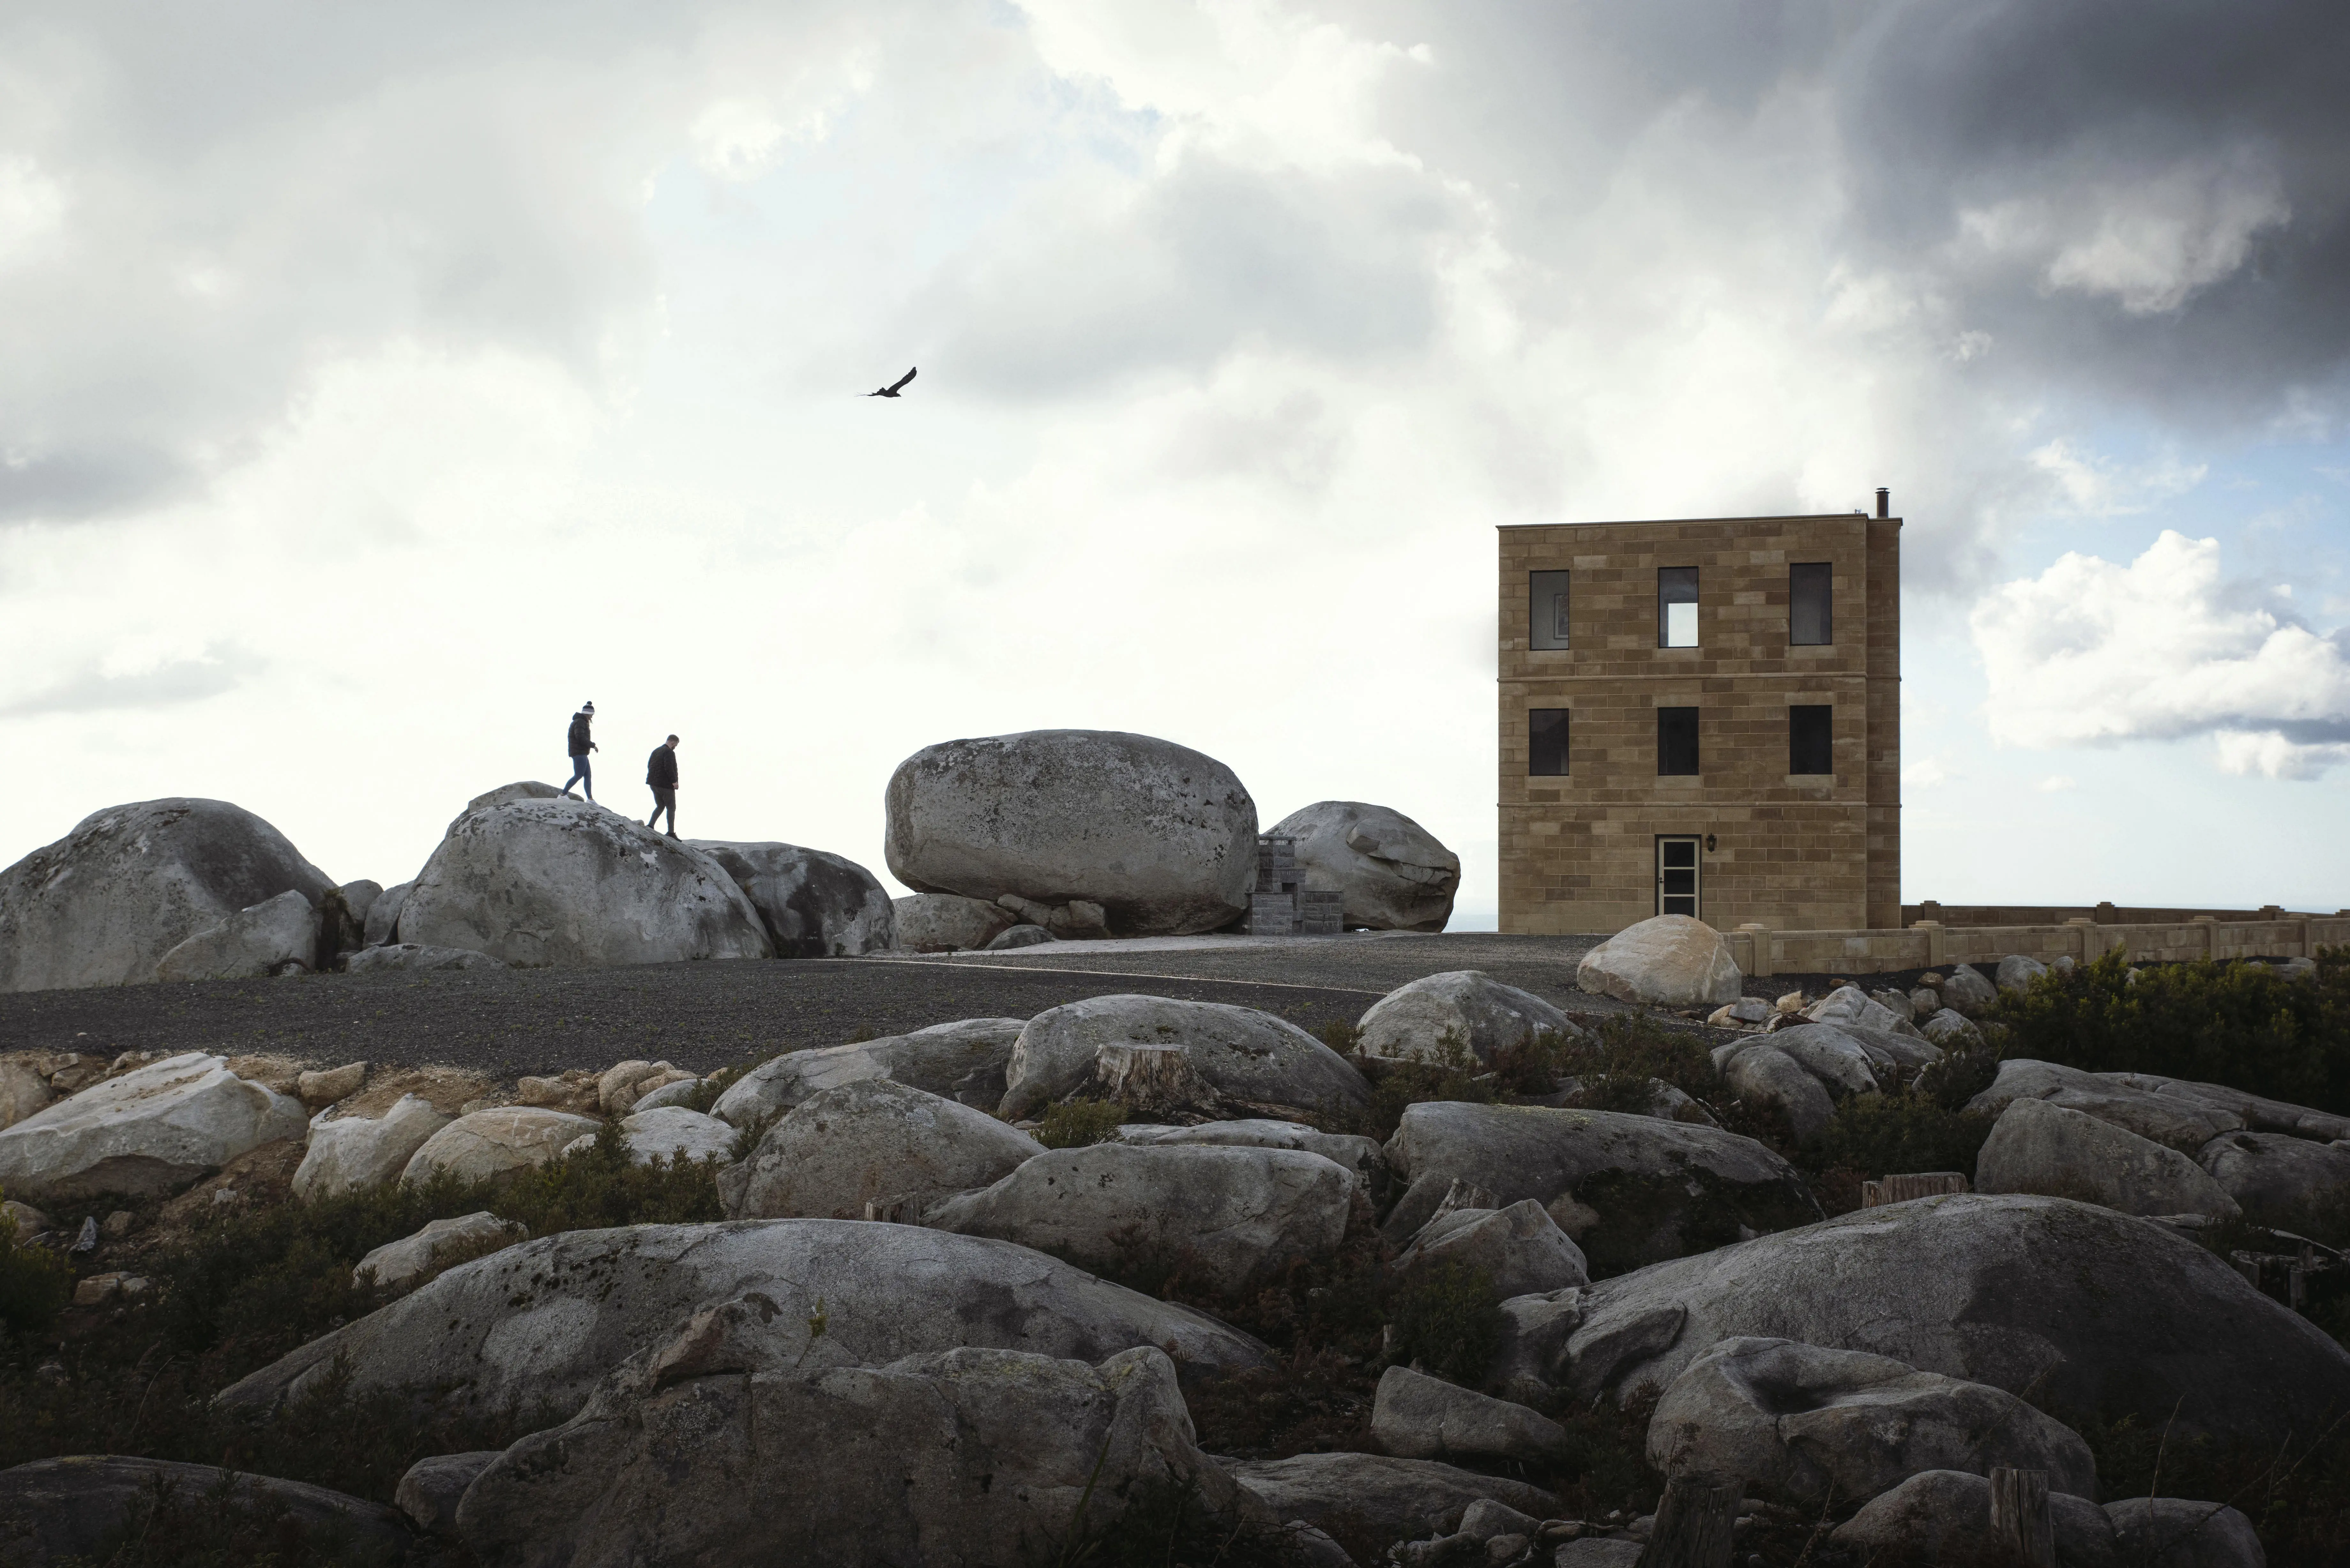 Two people walk along the top of large boulders in front of a modern brick building. 